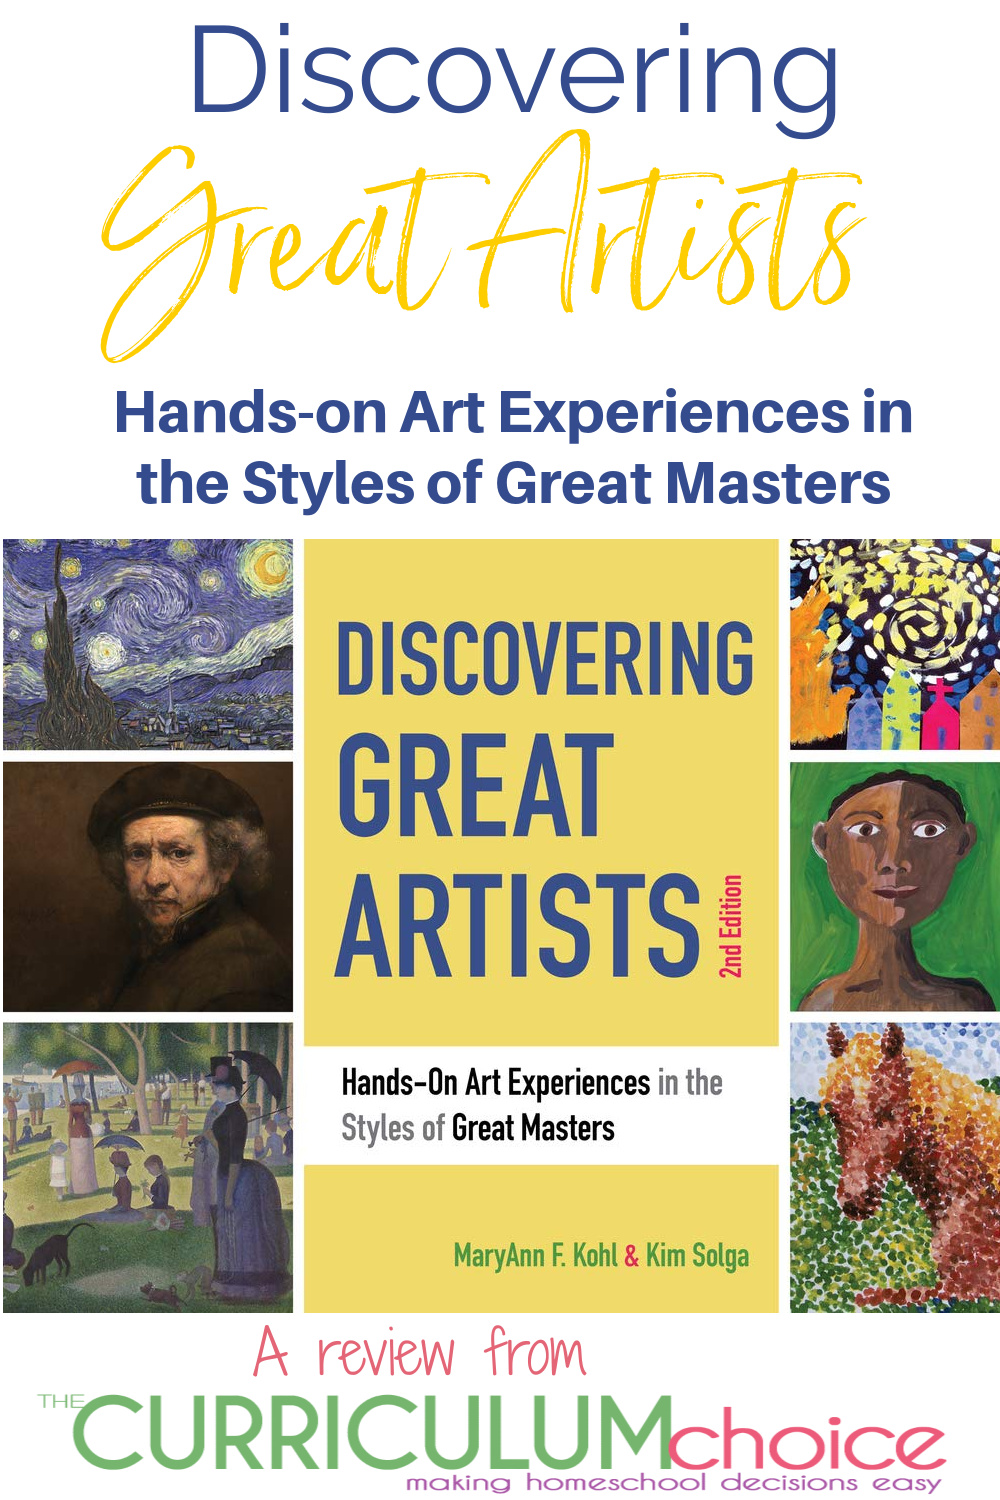 Discovering Great Artists is a book that makes art appreciation fun and easy. With over 60 artists and projects to choose from!